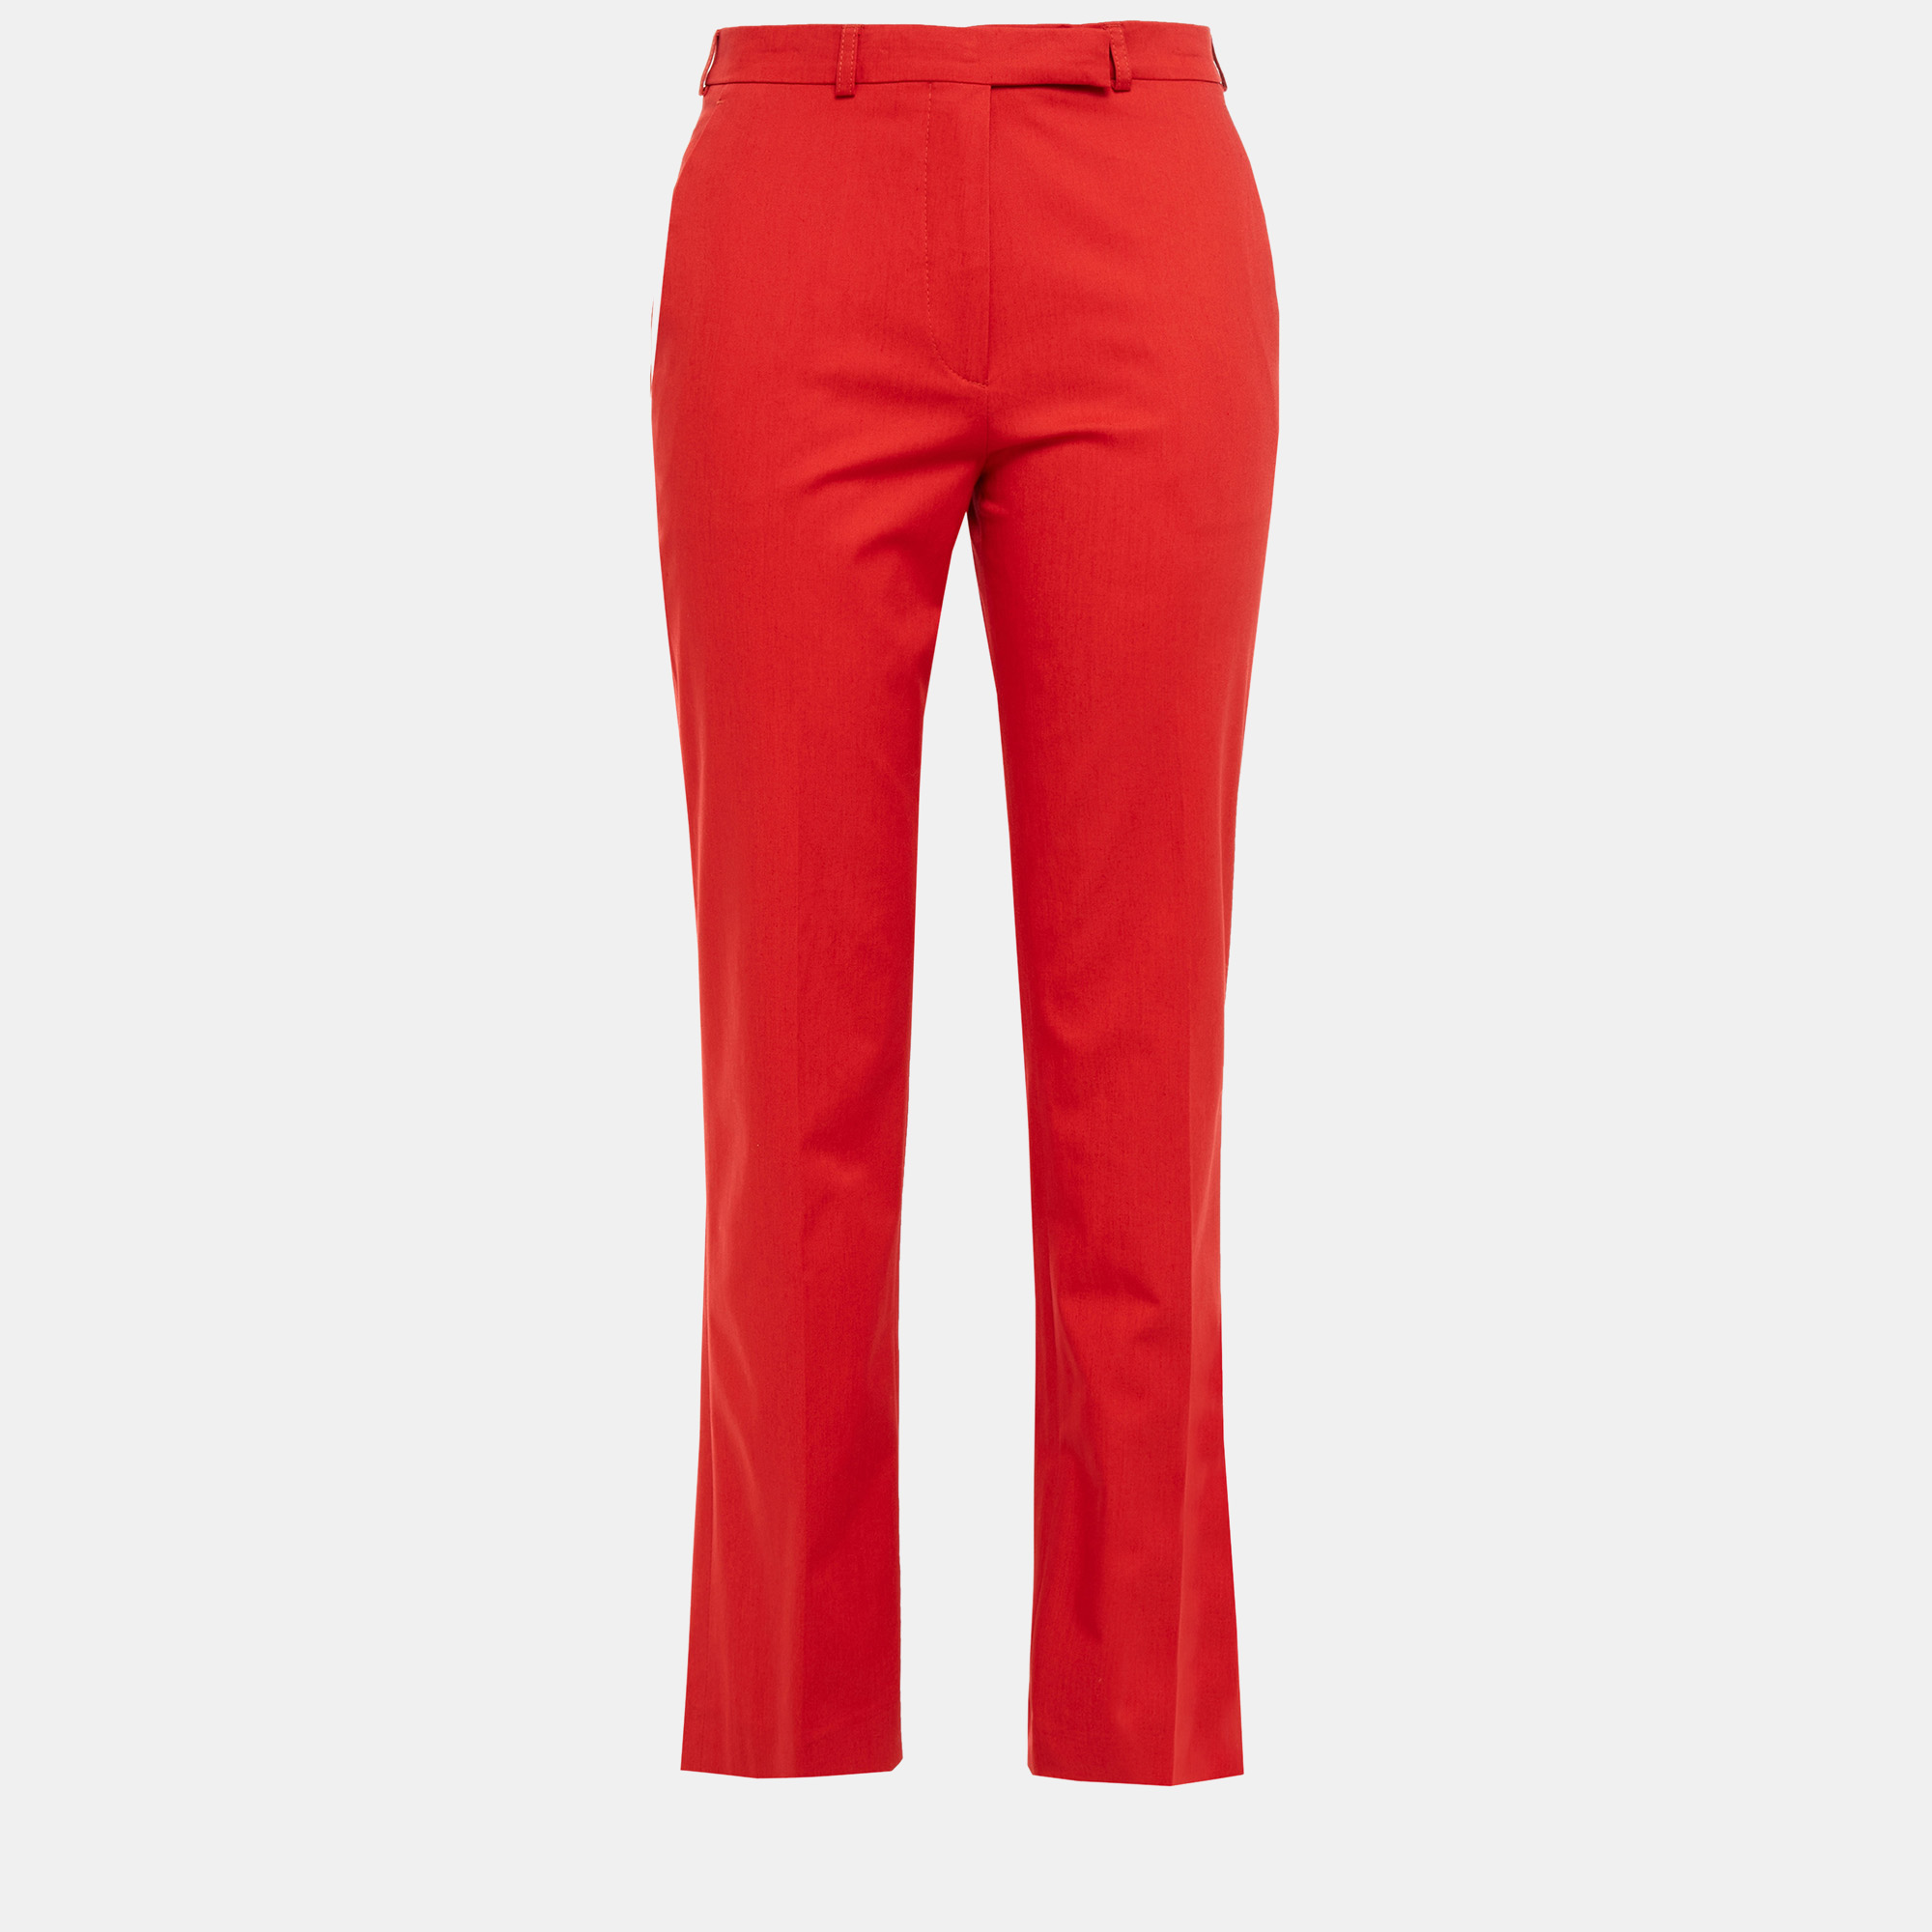 Pre-owned Etro Red Cotton Skinny Leg Pants M (it 44)